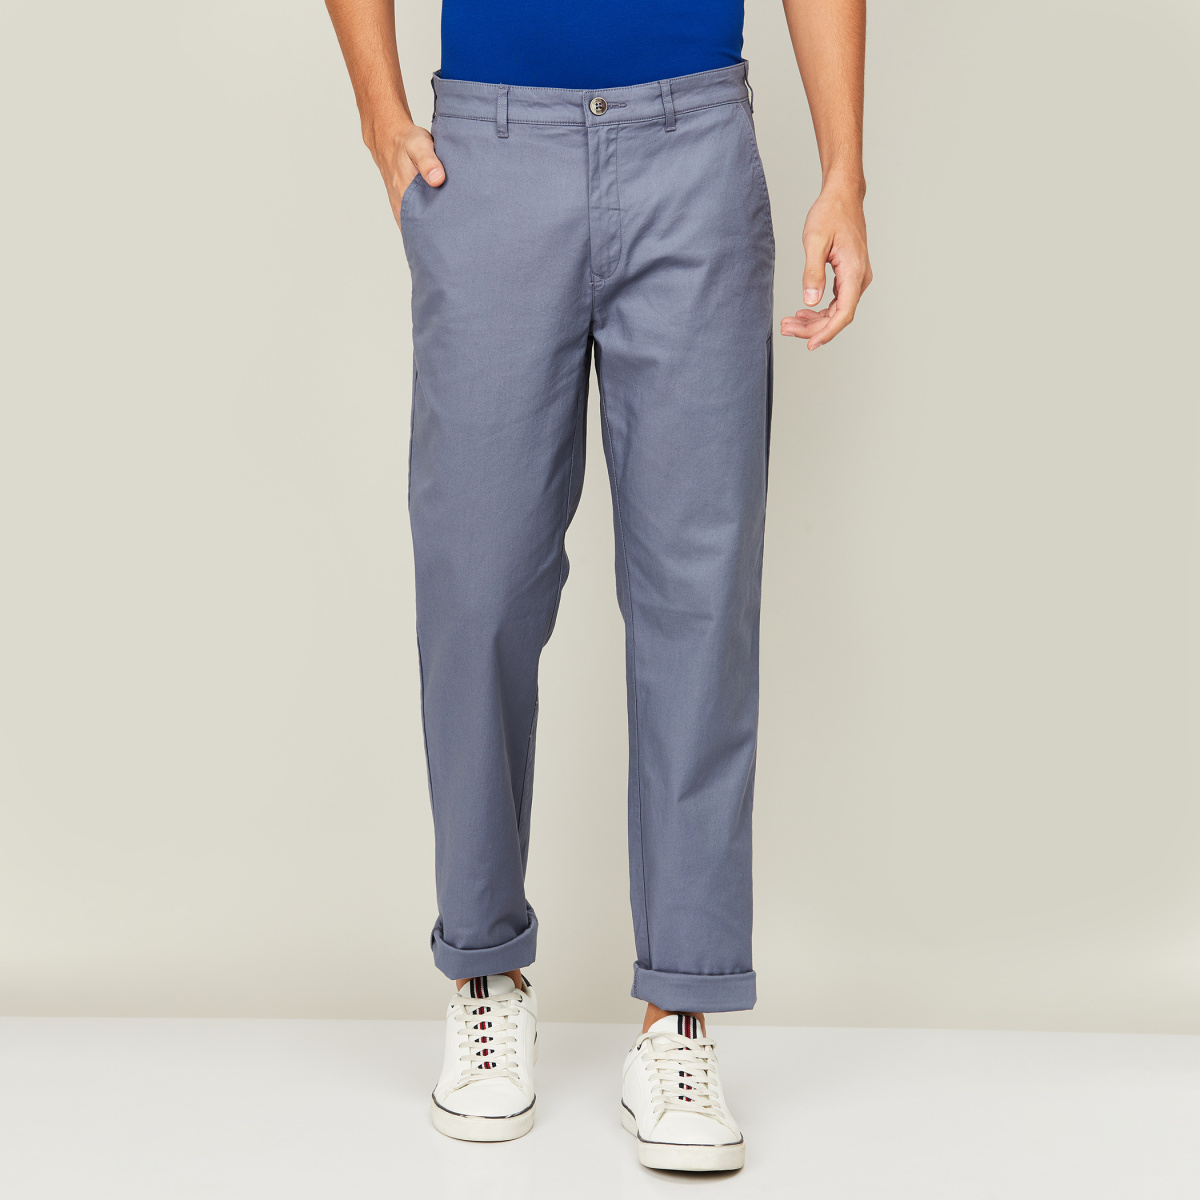 Colorplus Cotton Trousers - Buy Colorplus Cotton Trousers online in India